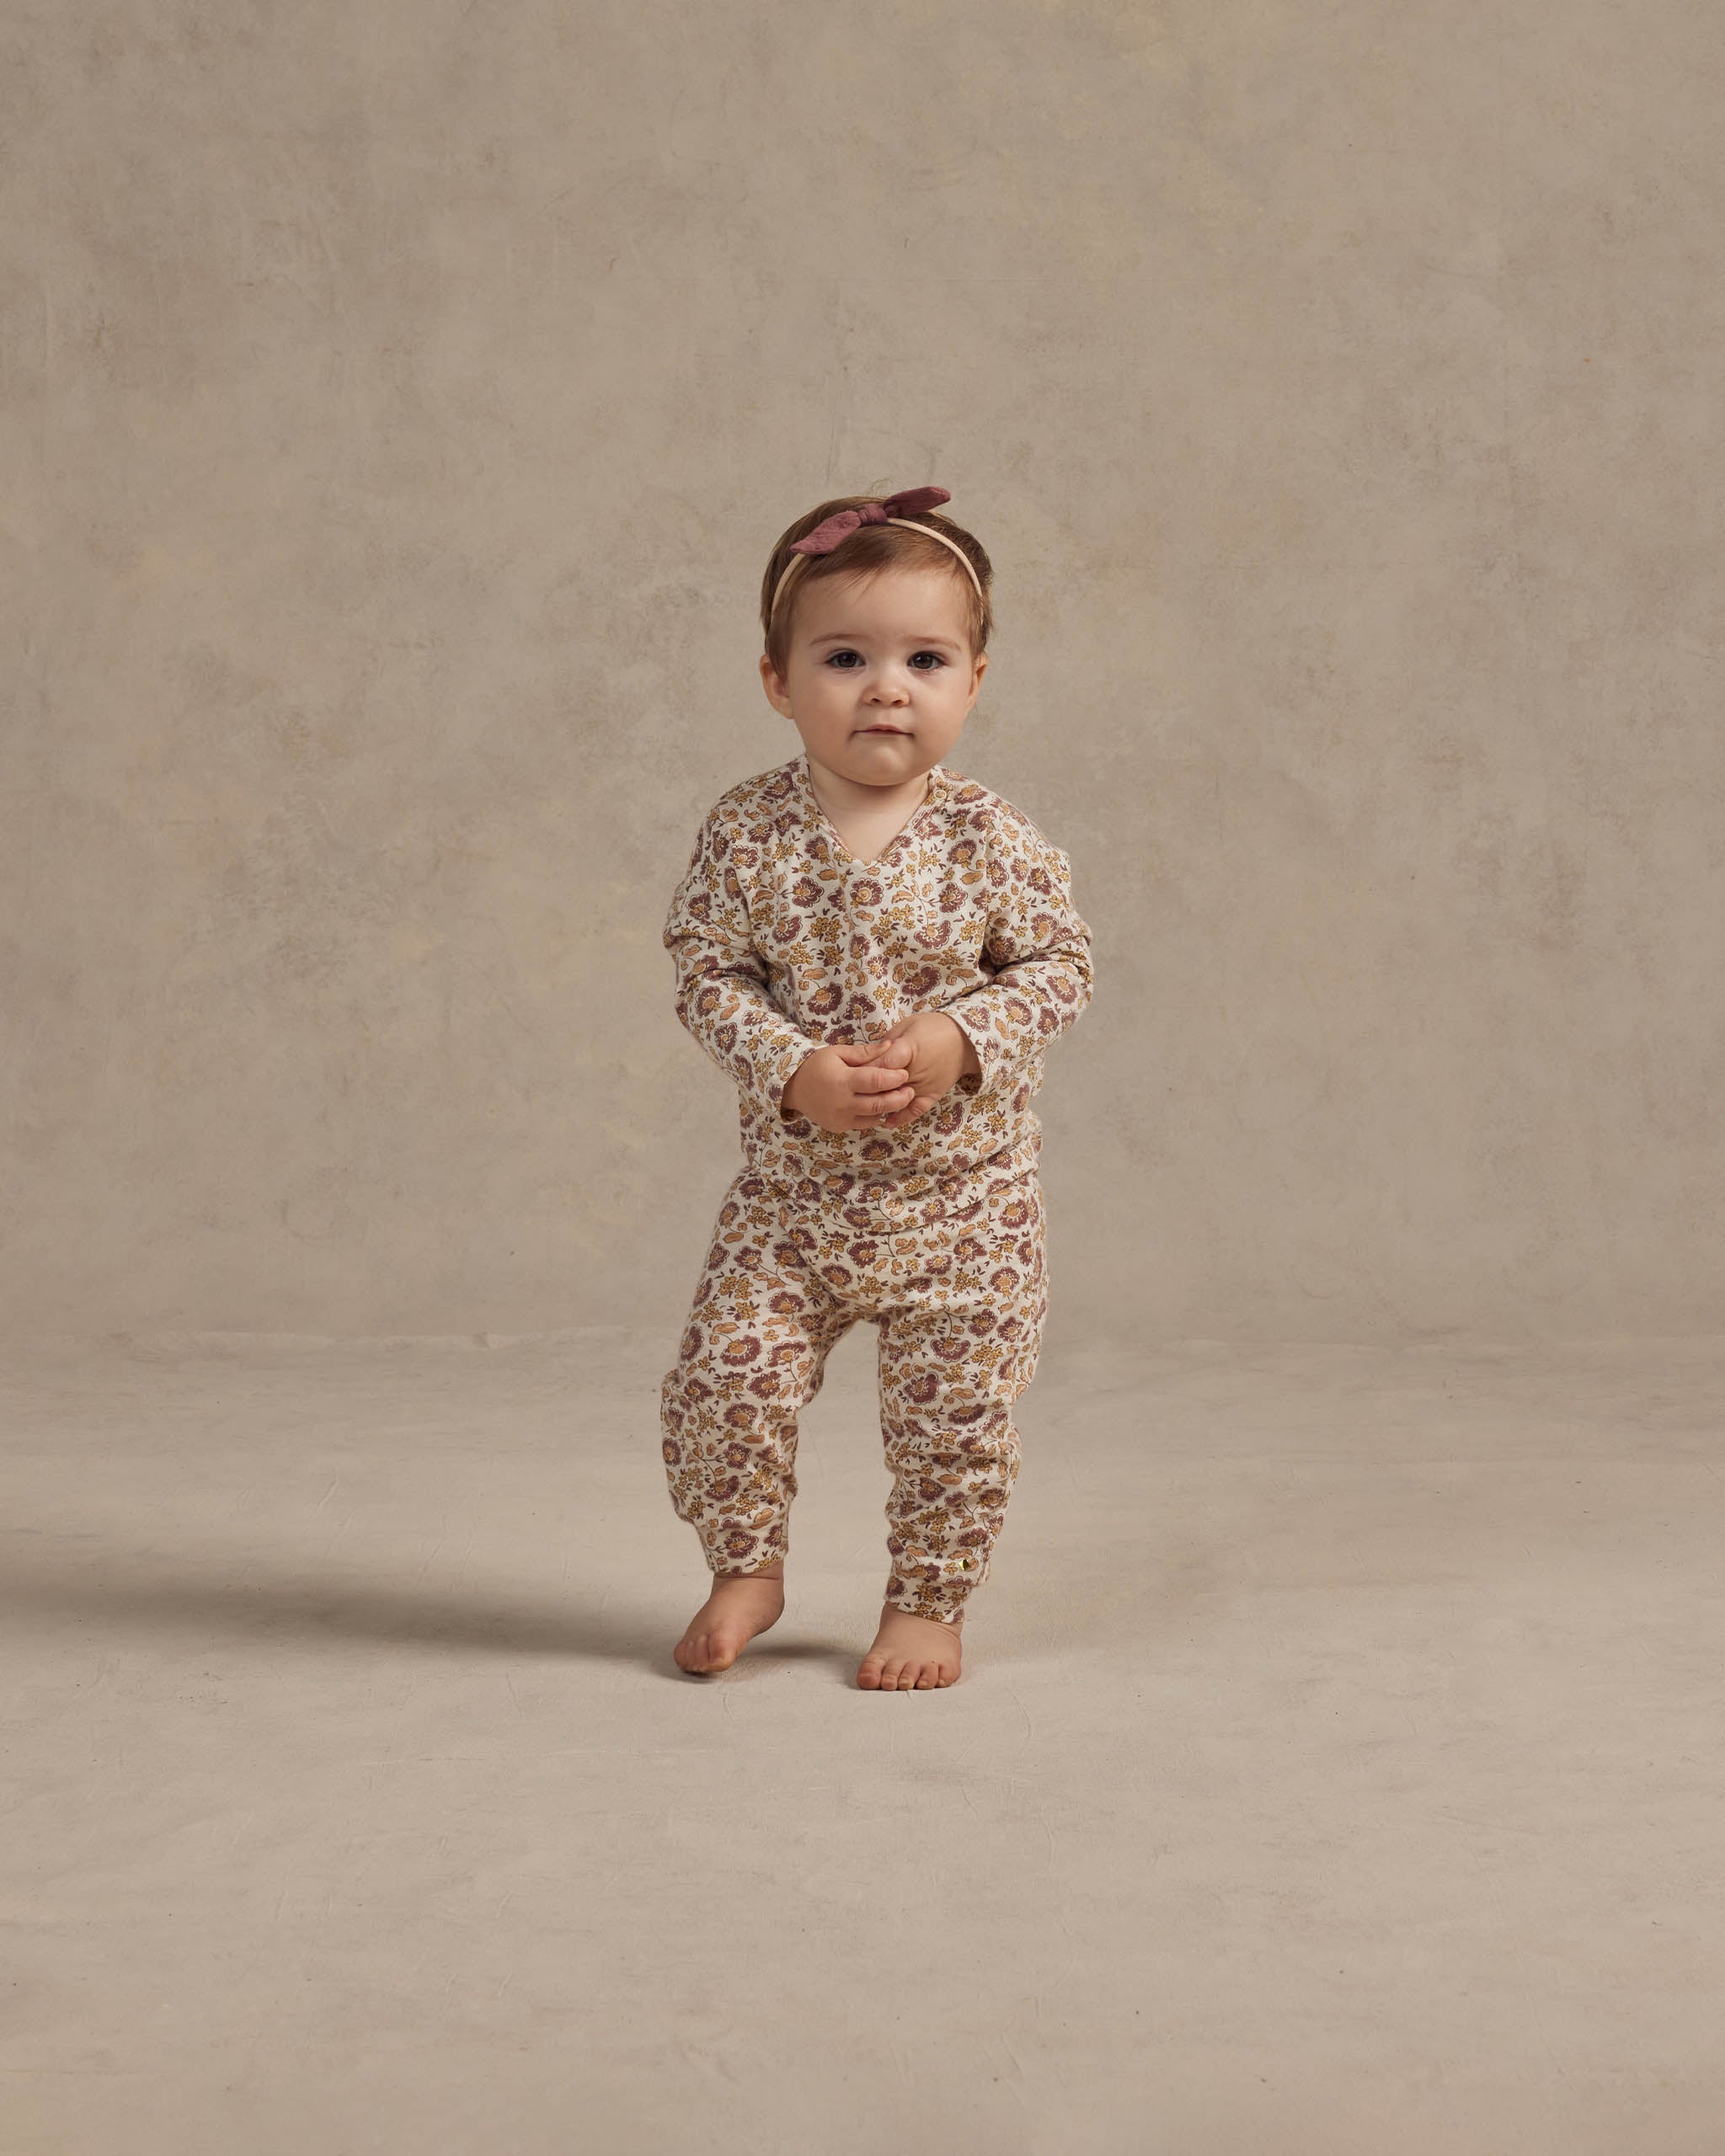 Slouch Pant || Magnolia - Rylee + Cru | Kids Clothes | Trendy Baby Clothes | Modern Infant Outfits |